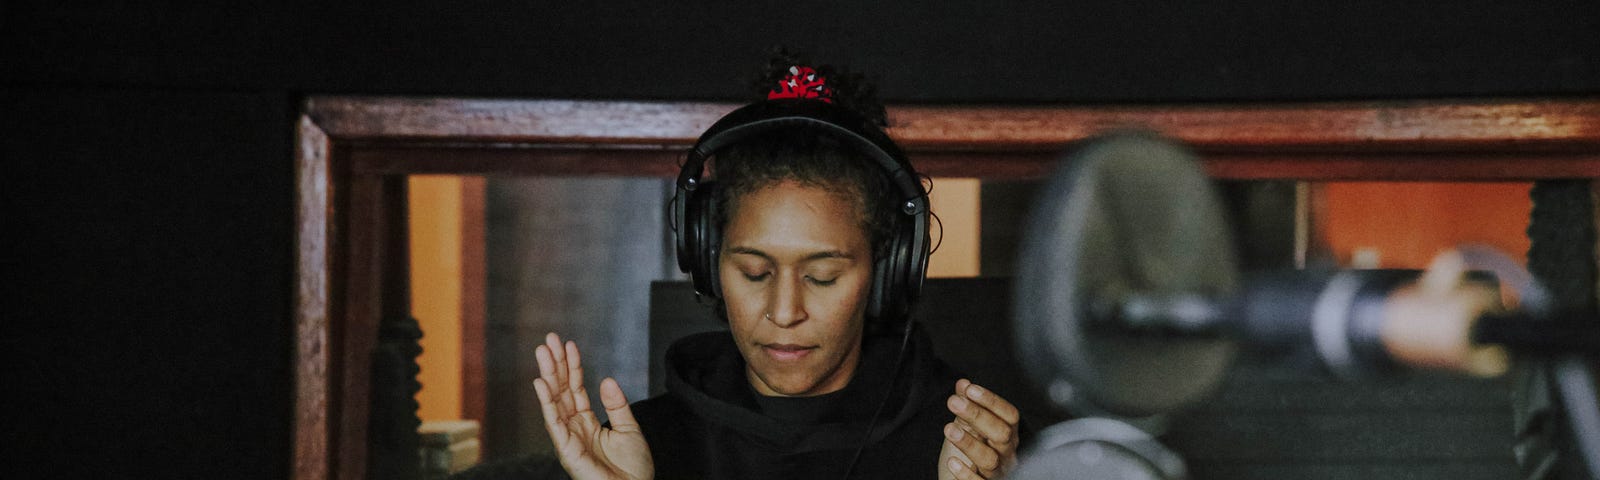 Kat in the music studio with head phones on, listening as she holds her hands up about to clap